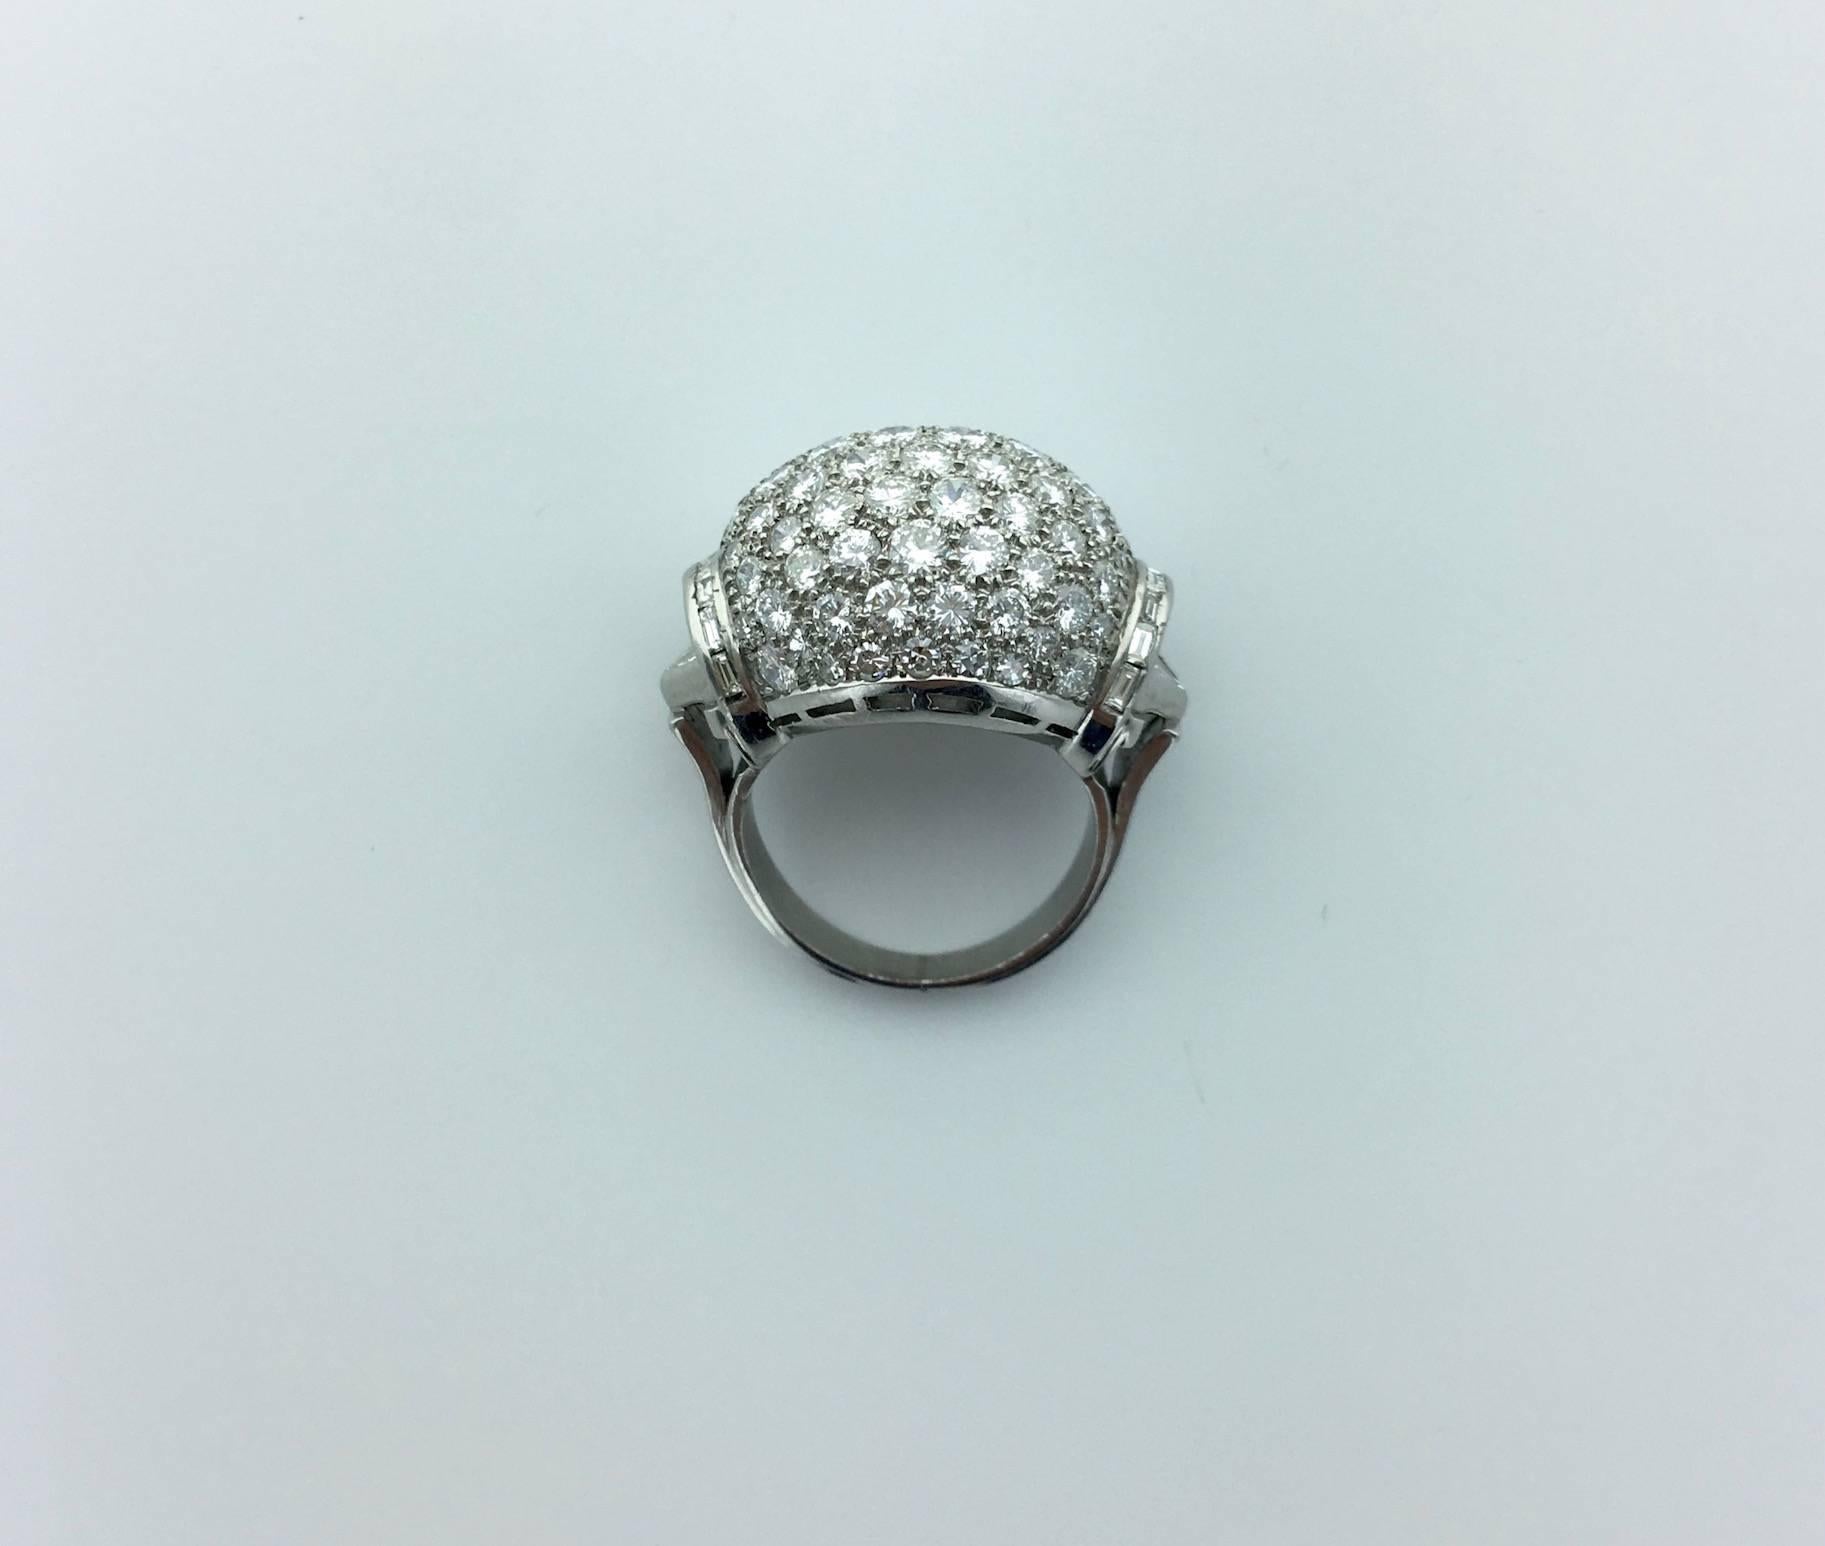 Top Design, Perfect Taste! All pave Diamond (approximately 8.00 carats) on Platinum Ring.
Circa 1940.

Gross weight: 18.14 grams.